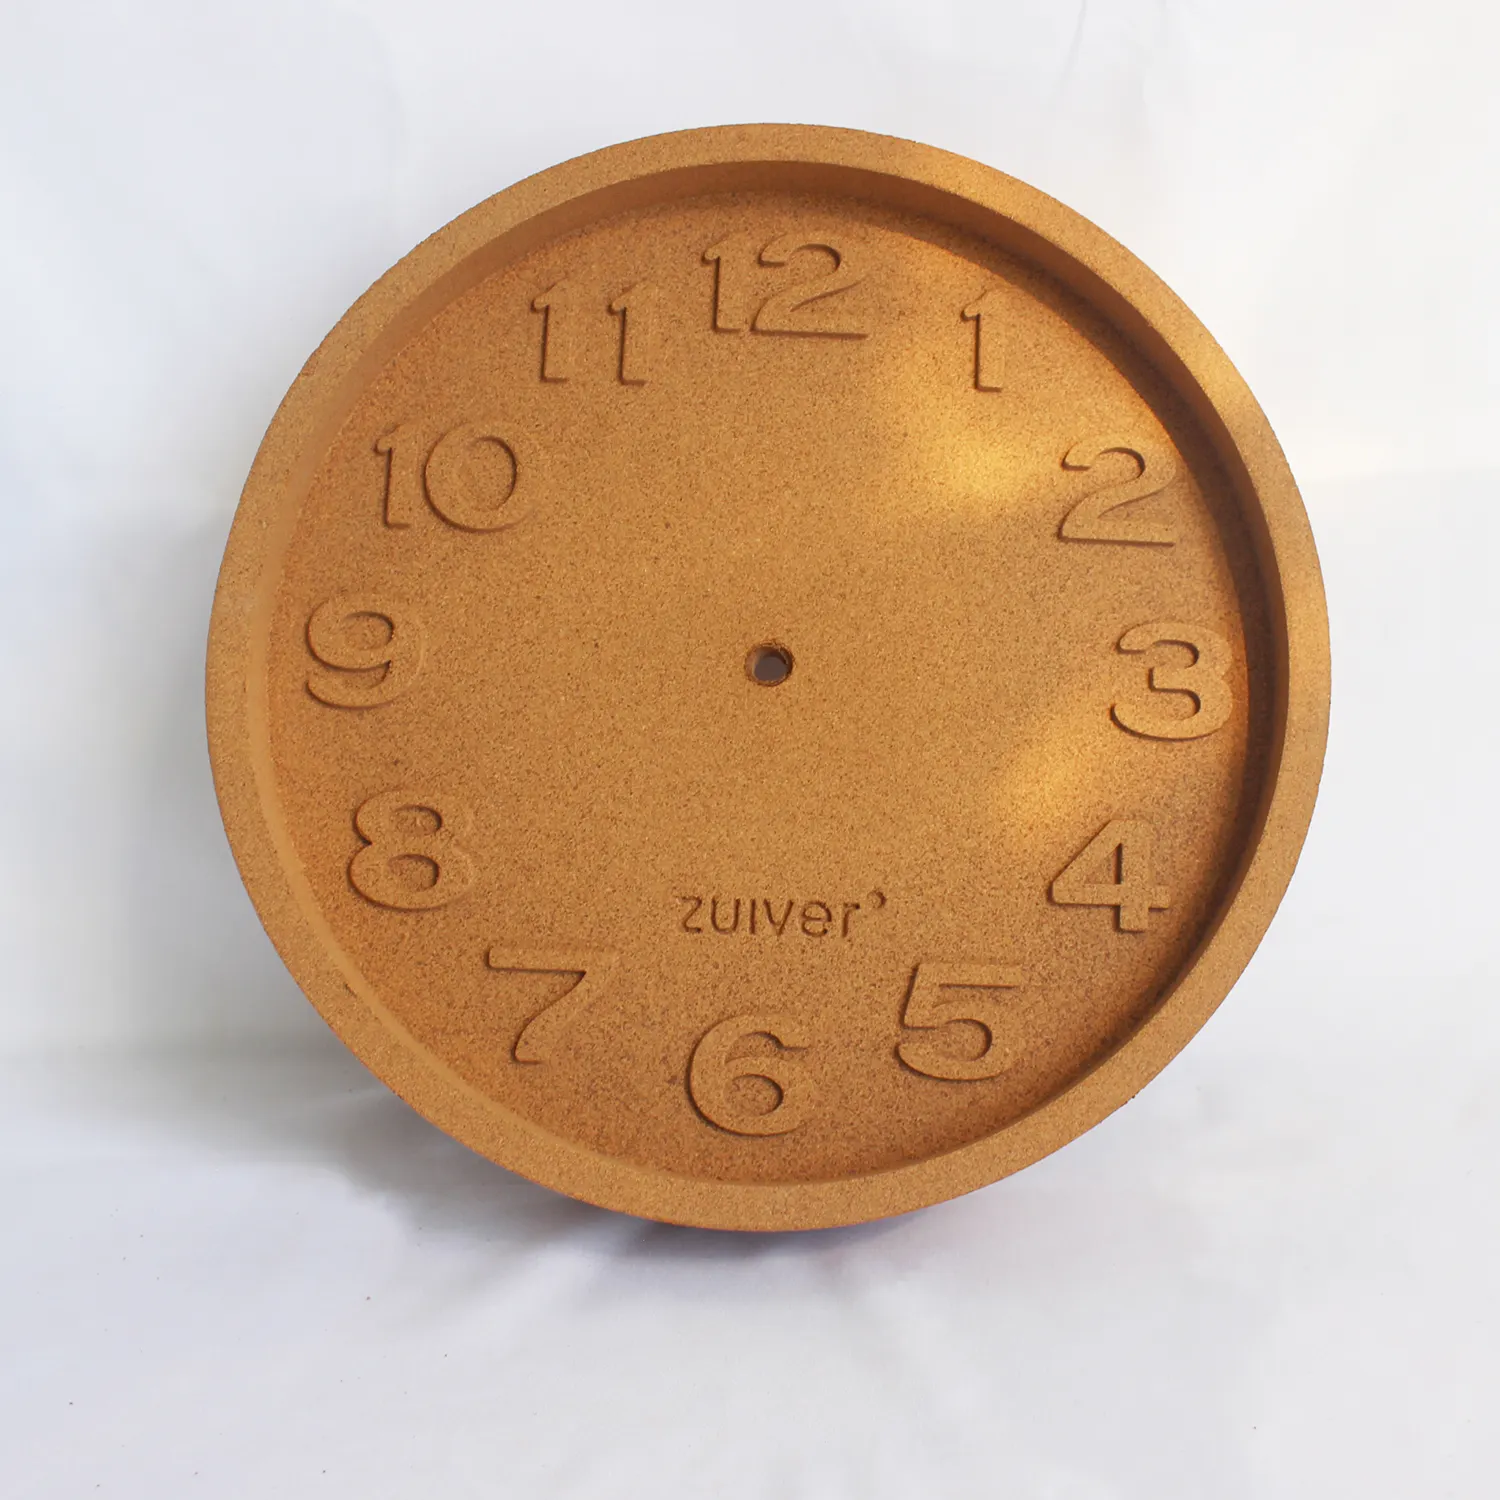 Wood Wall Clock Made of Cork Large Round Cork Wall Clock Battery Operated Silent Quartz Movement